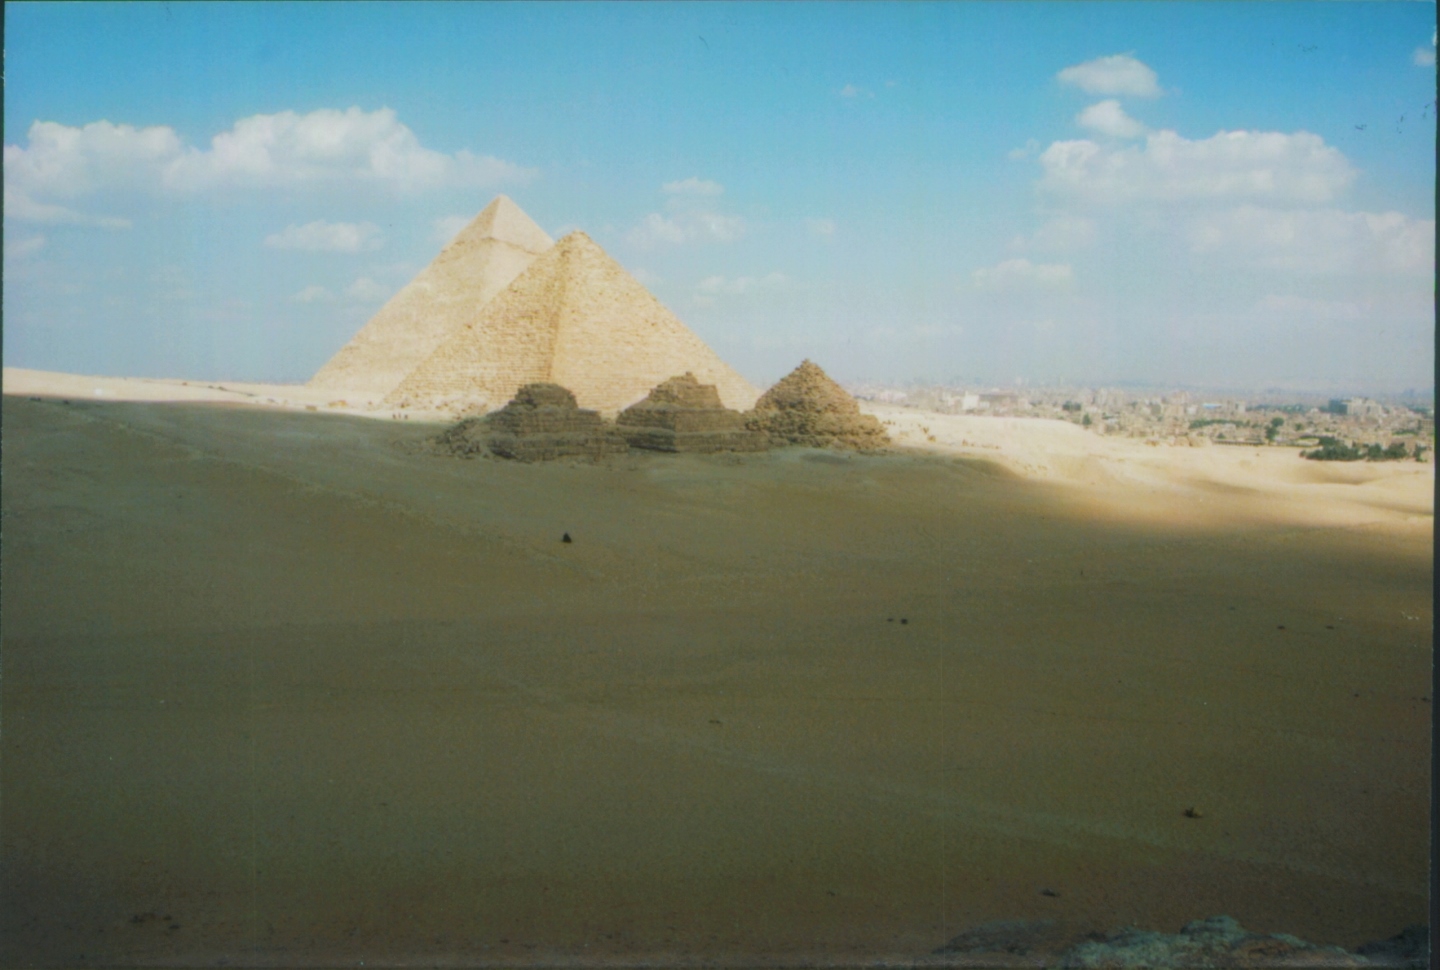 Distance View of Pyramids of Giza Egypt 1998